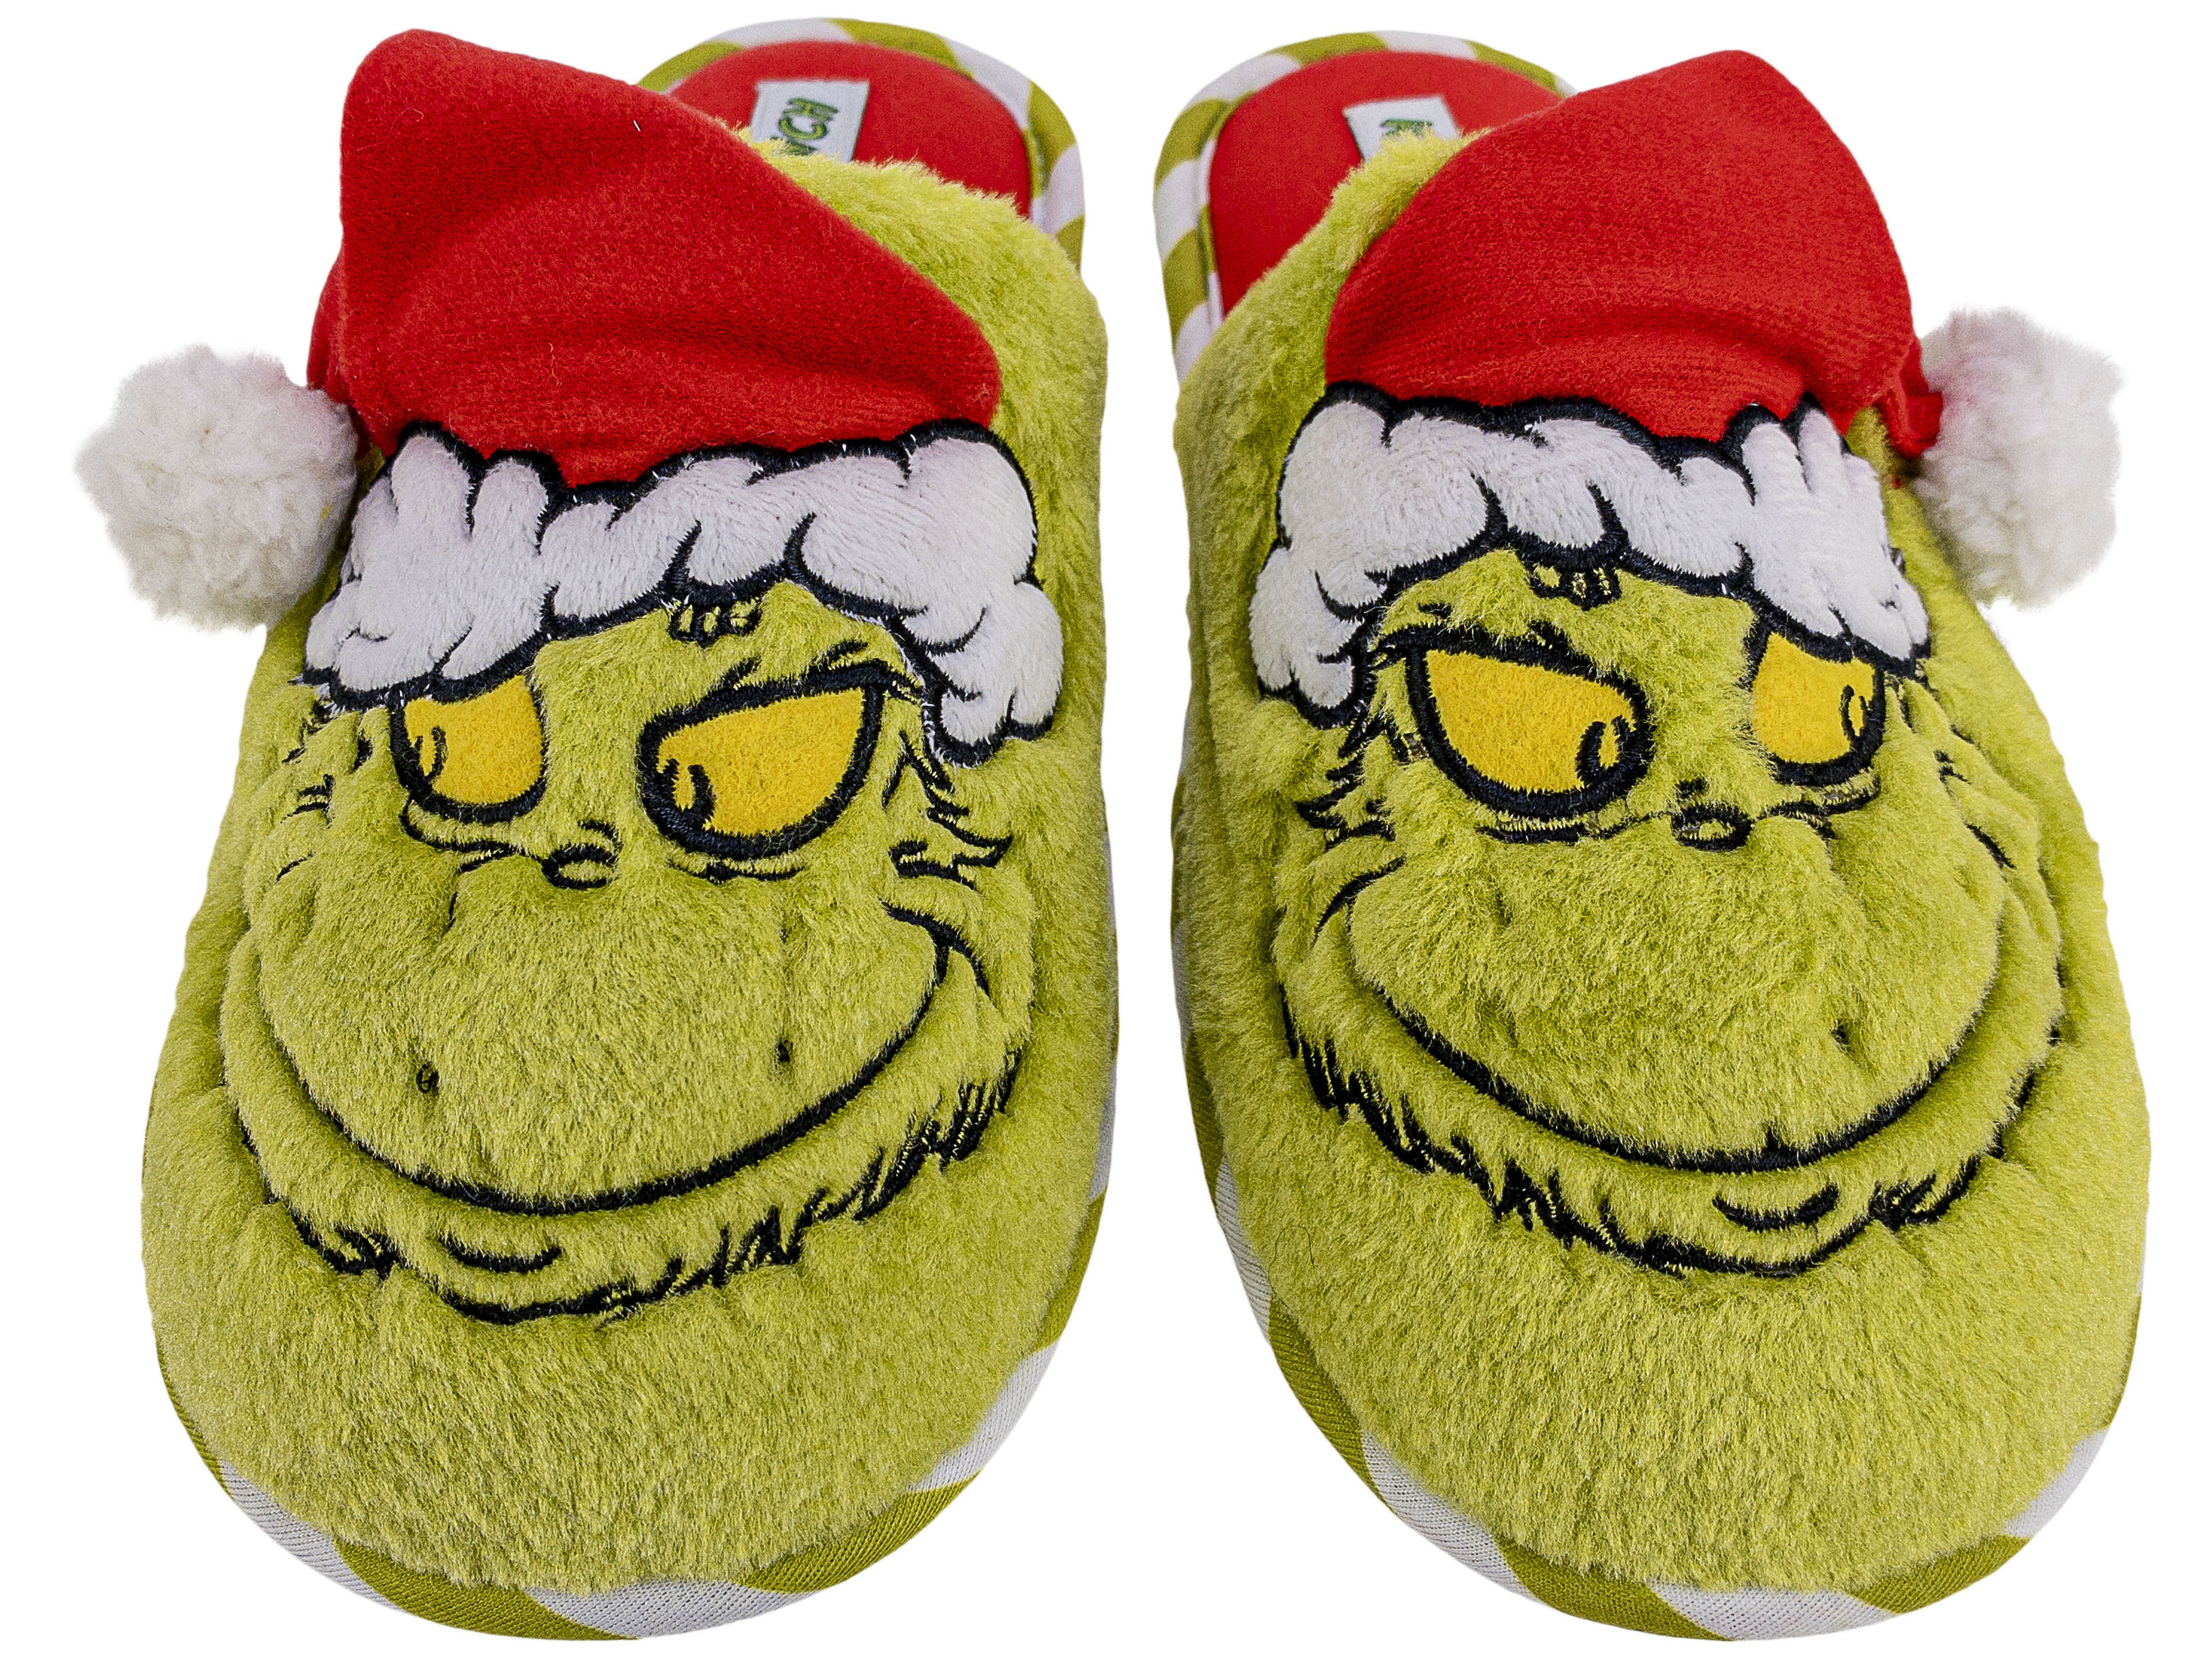 Seuss Red Womens Thing 1 and Thing 2 Slip On House Slippers Size 9-10 Dr 